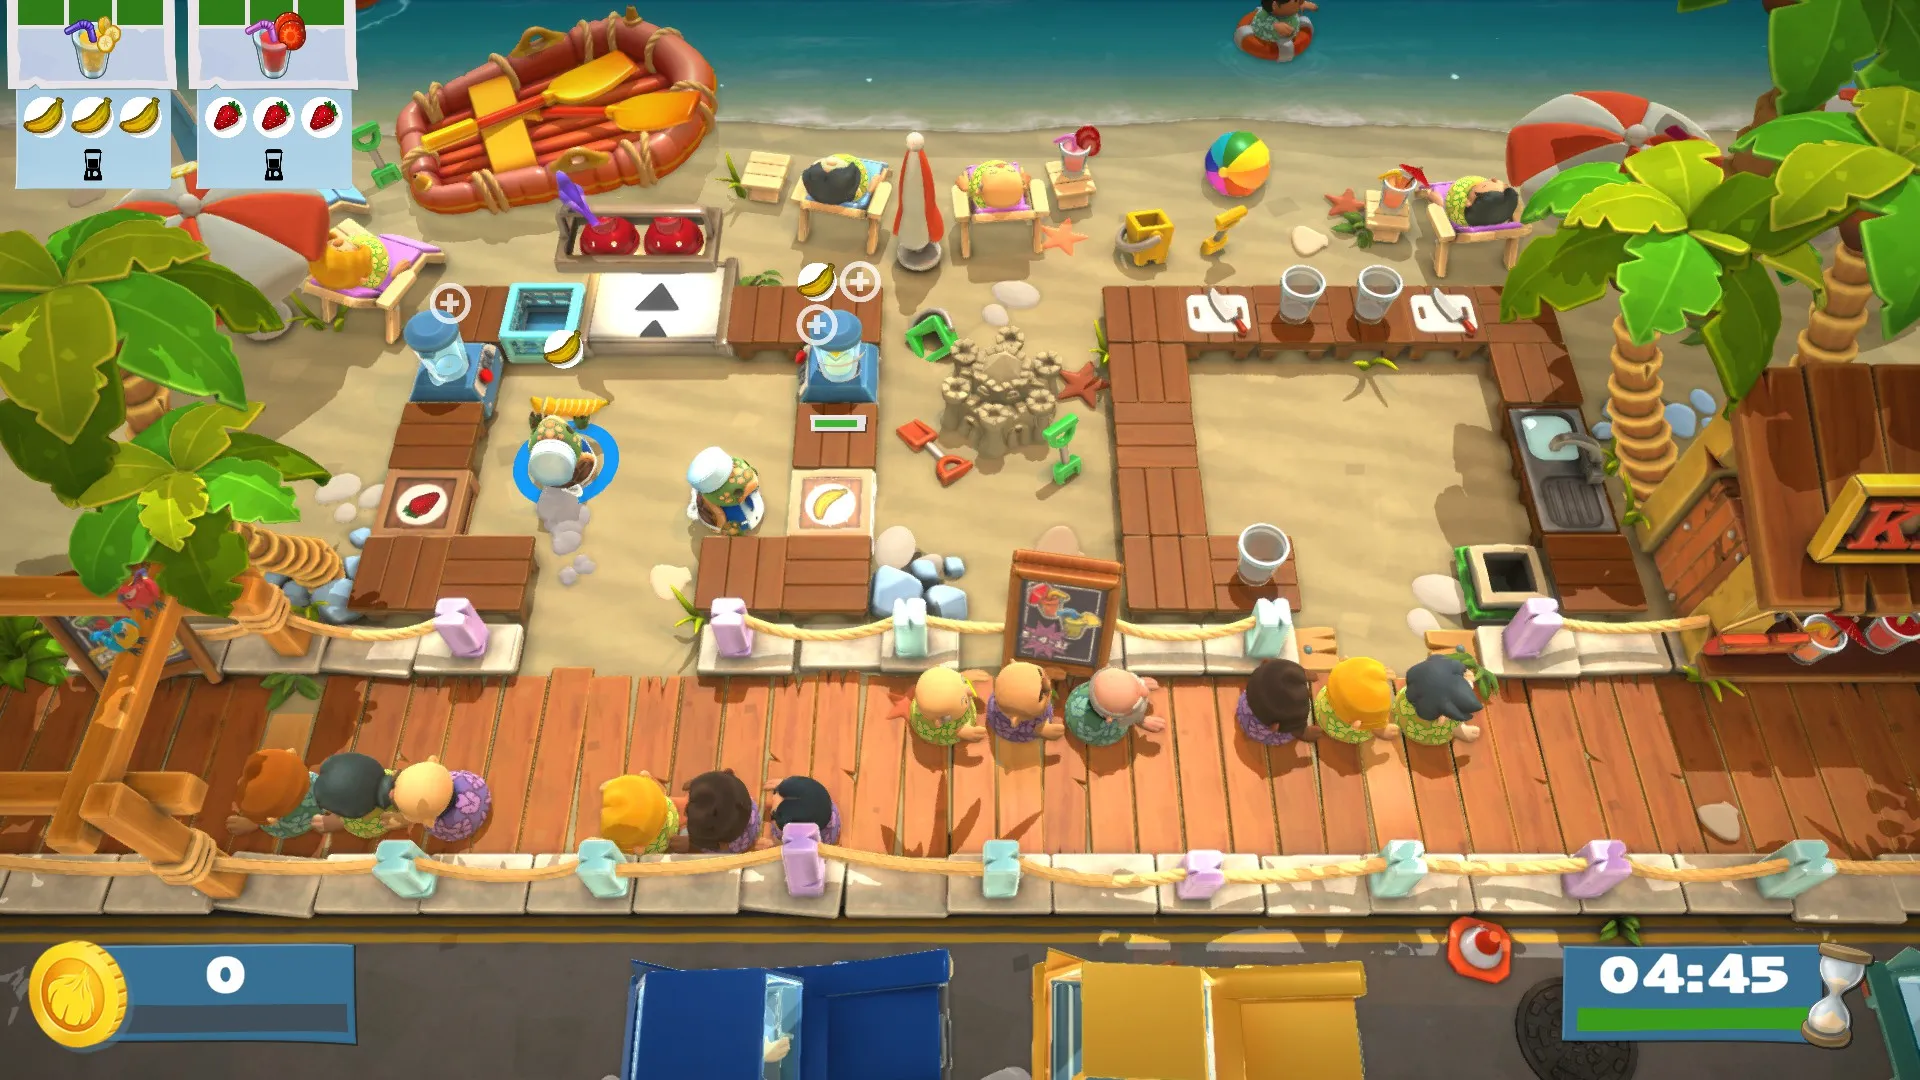 Is Overcooked 2 Cross Platforms of Xbox, PS4 and PC?